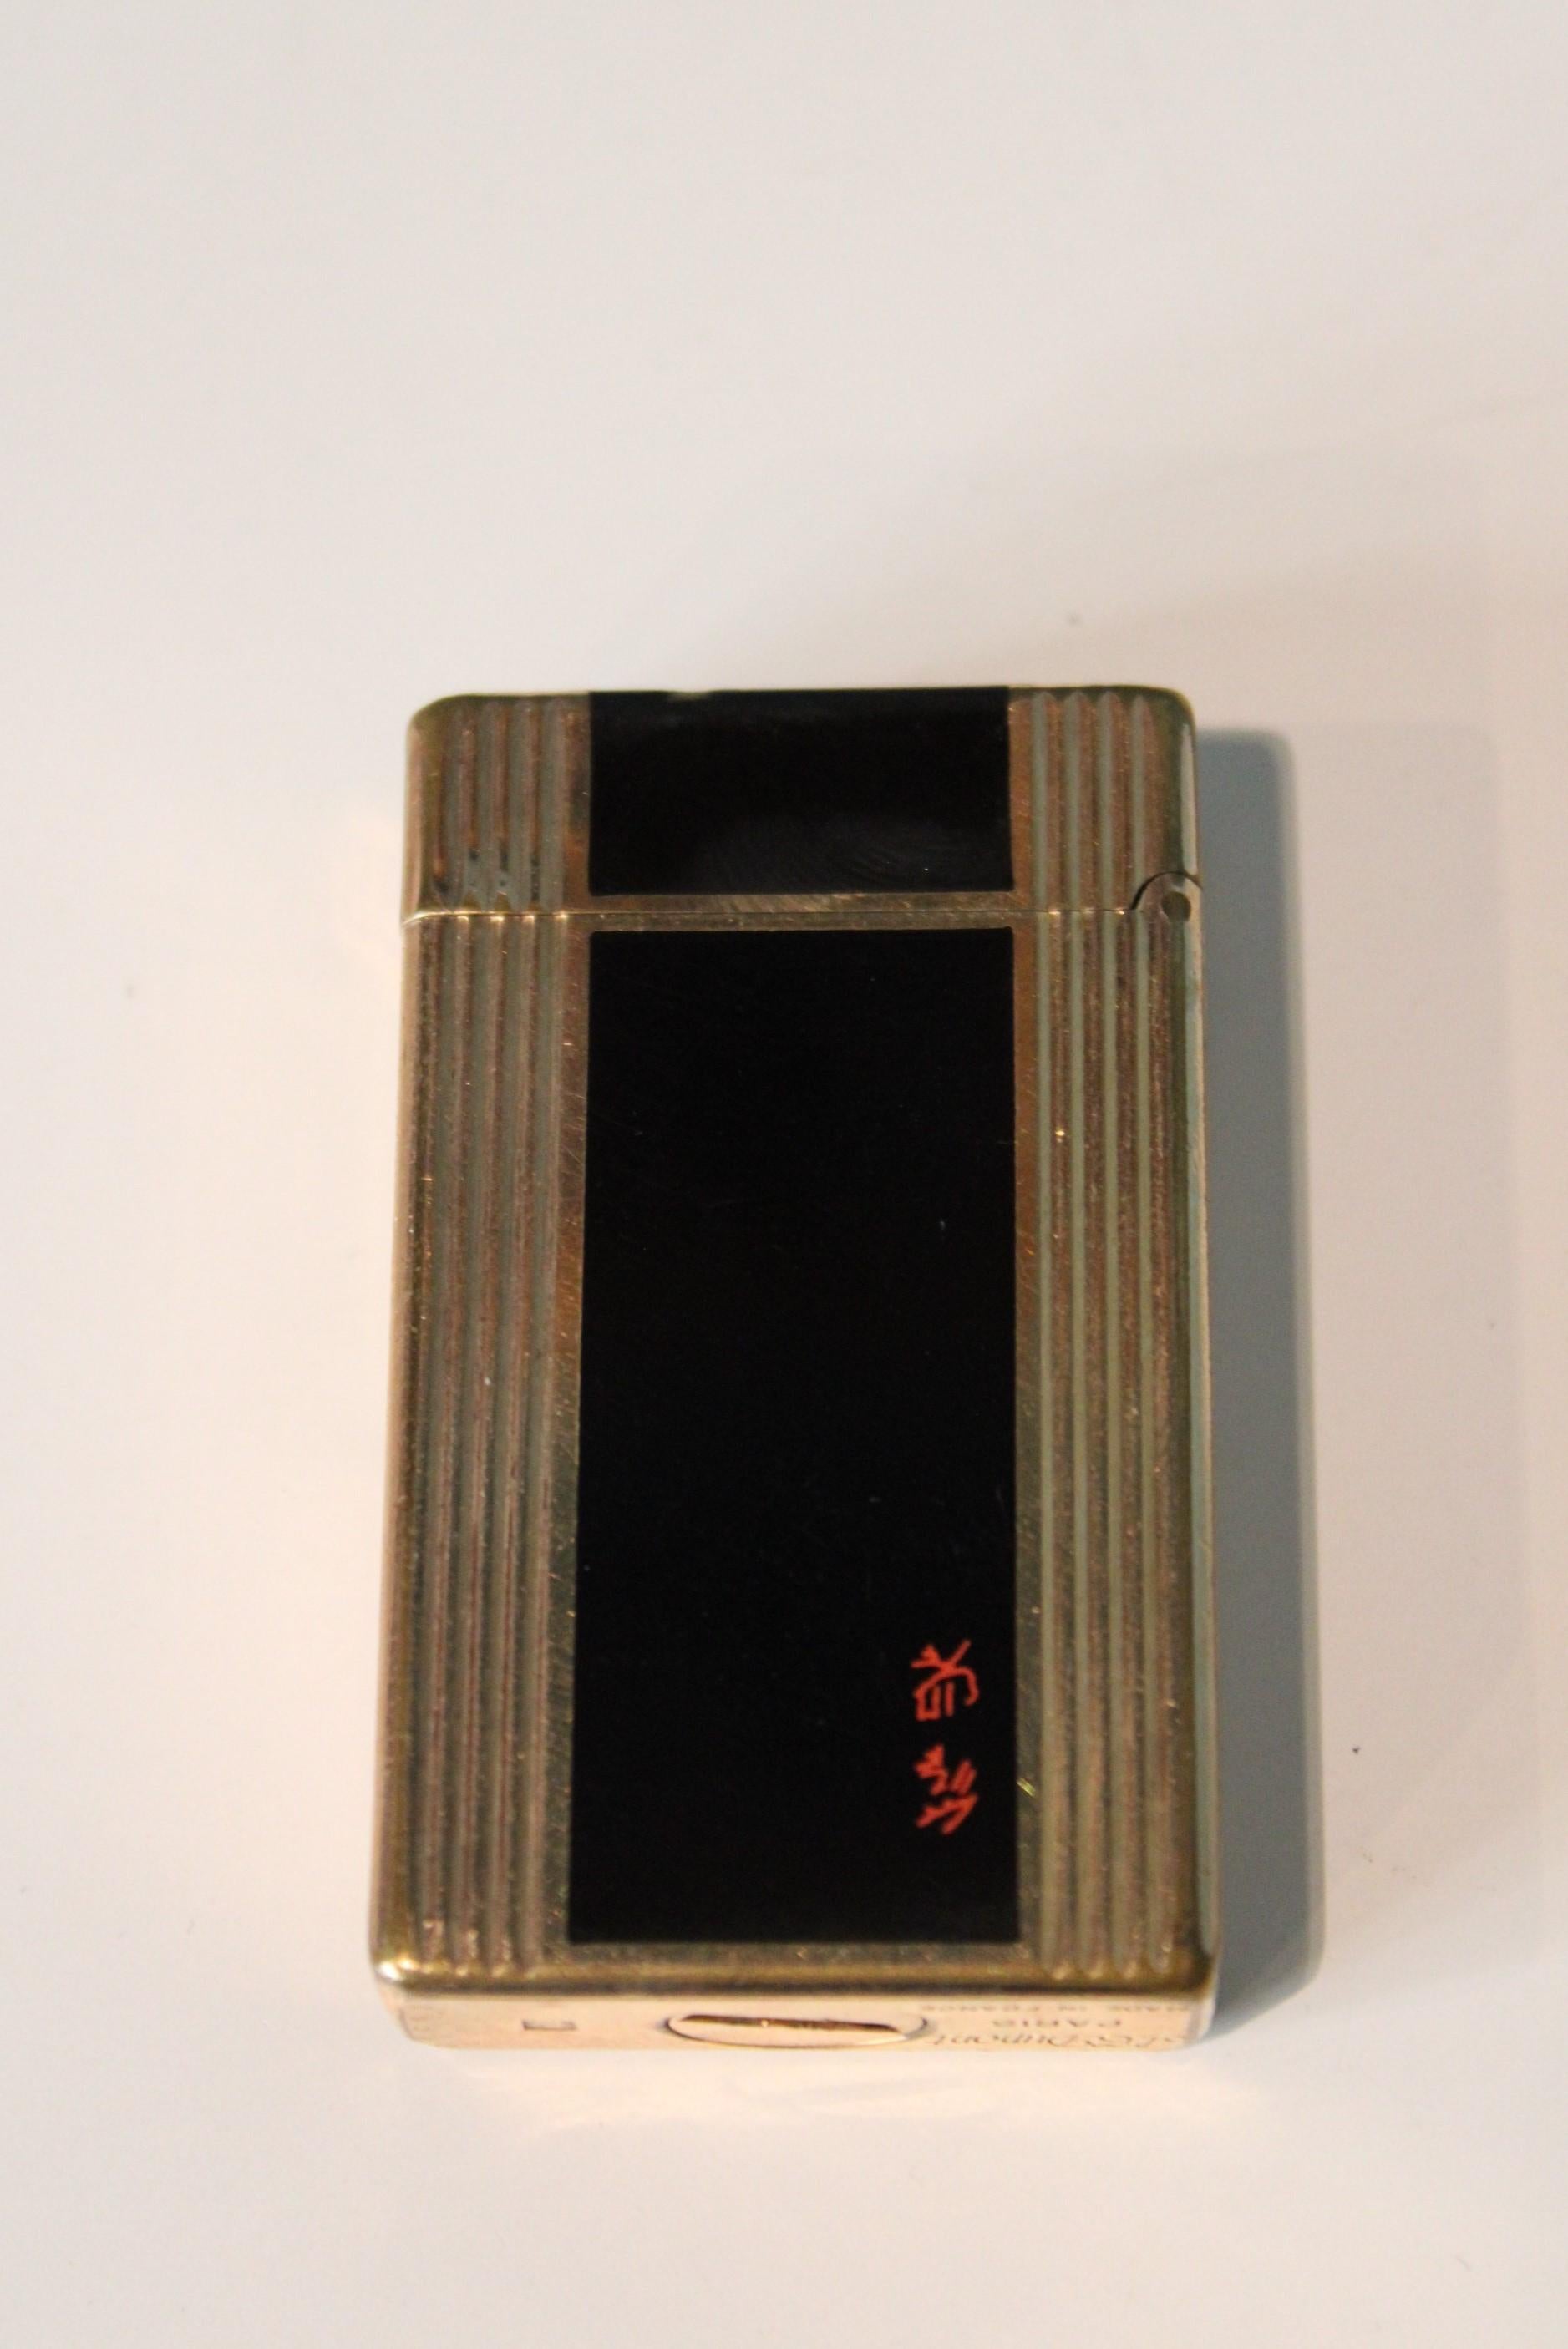 S. T. DUPONT lighter. 
Gold plated, Hallmark. Chinese lacquer. 
Nonfunctional.
 